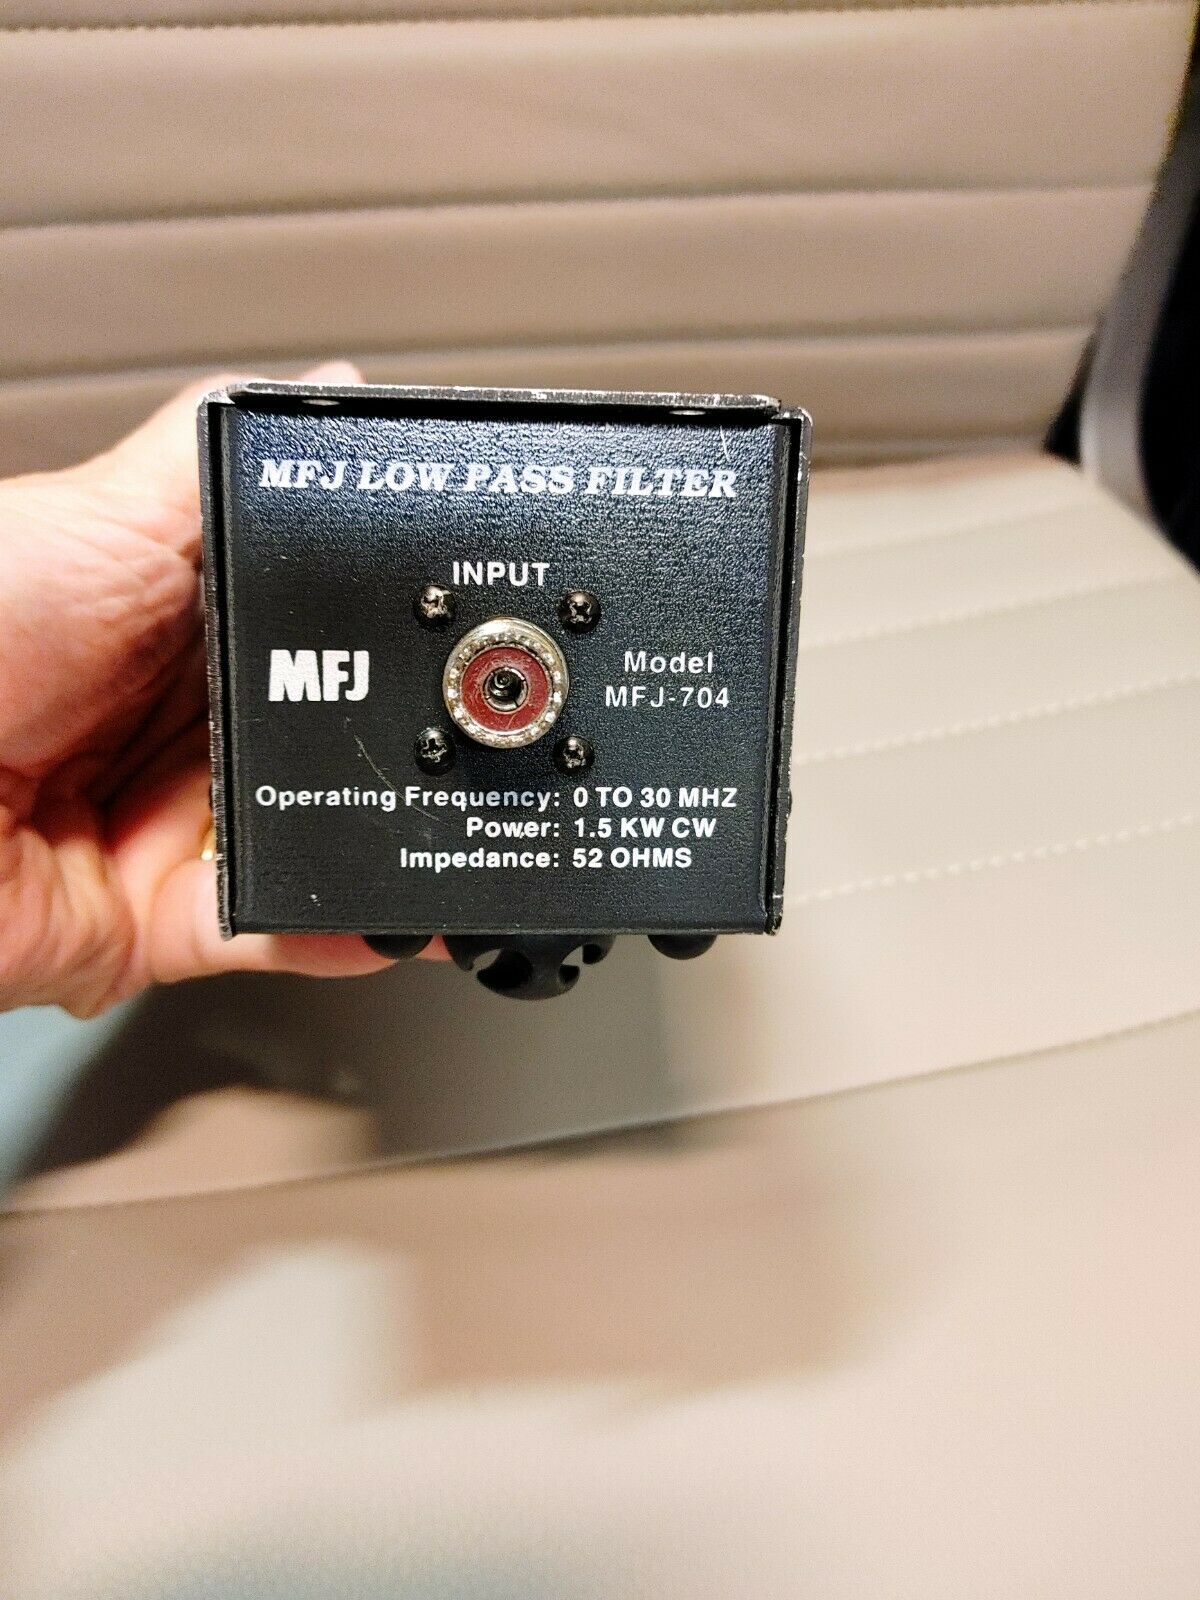 Mfj -704 Low Pass Filter 1.8mhz-30mhz 1500 Watts Pep For Cb Or Ham Transmitters